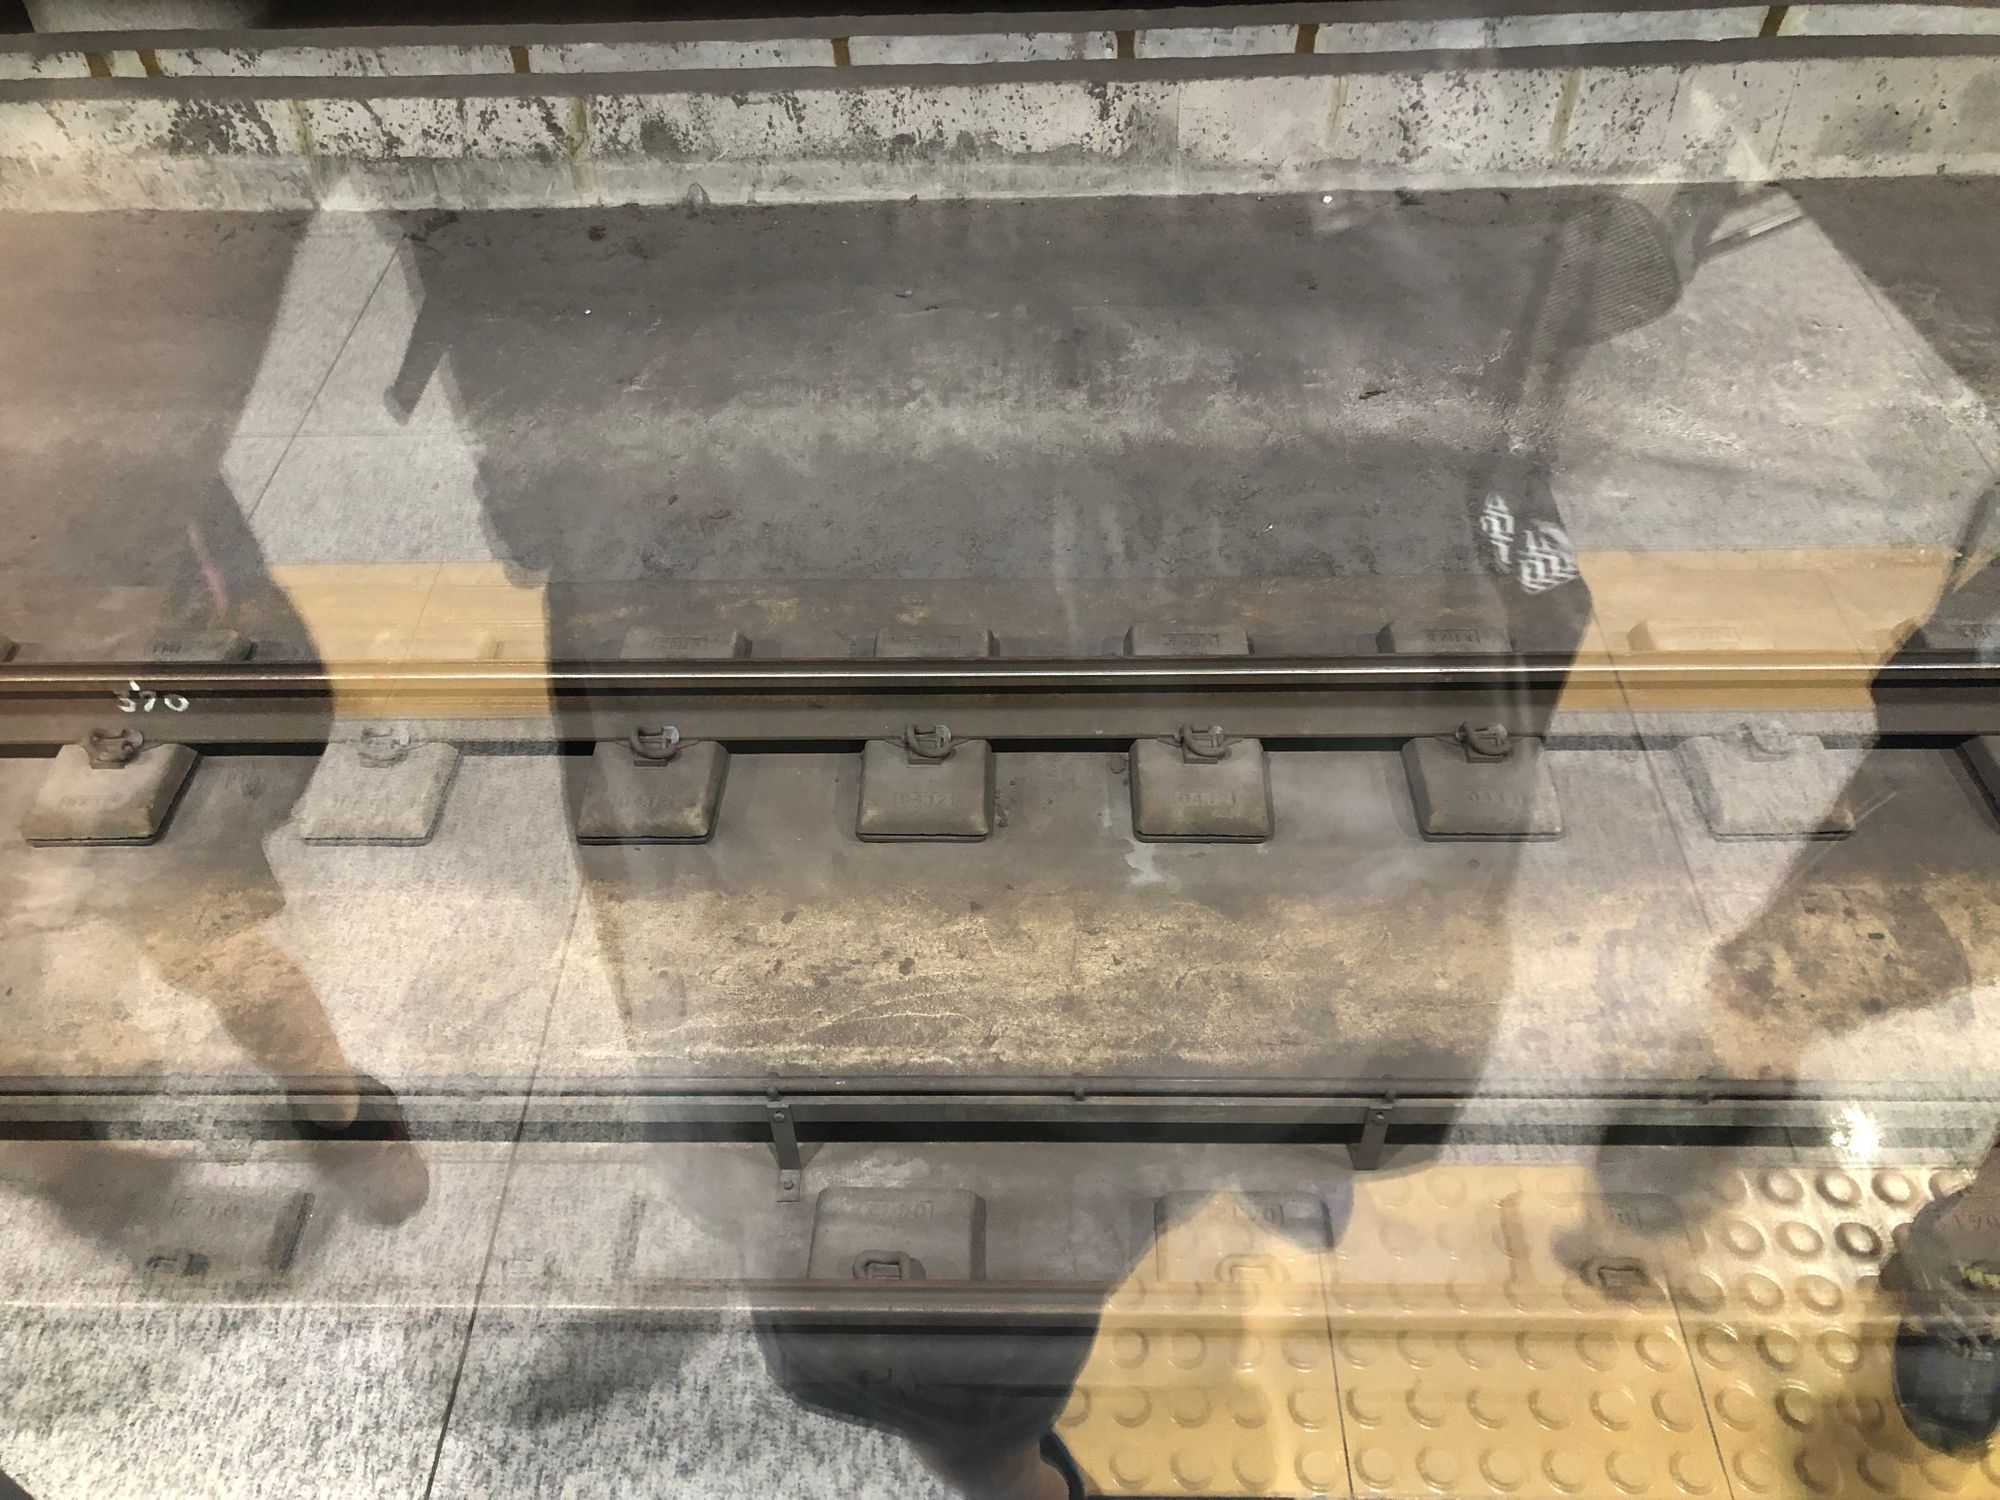 A very clean subway track compare to Toronto (Image by author)